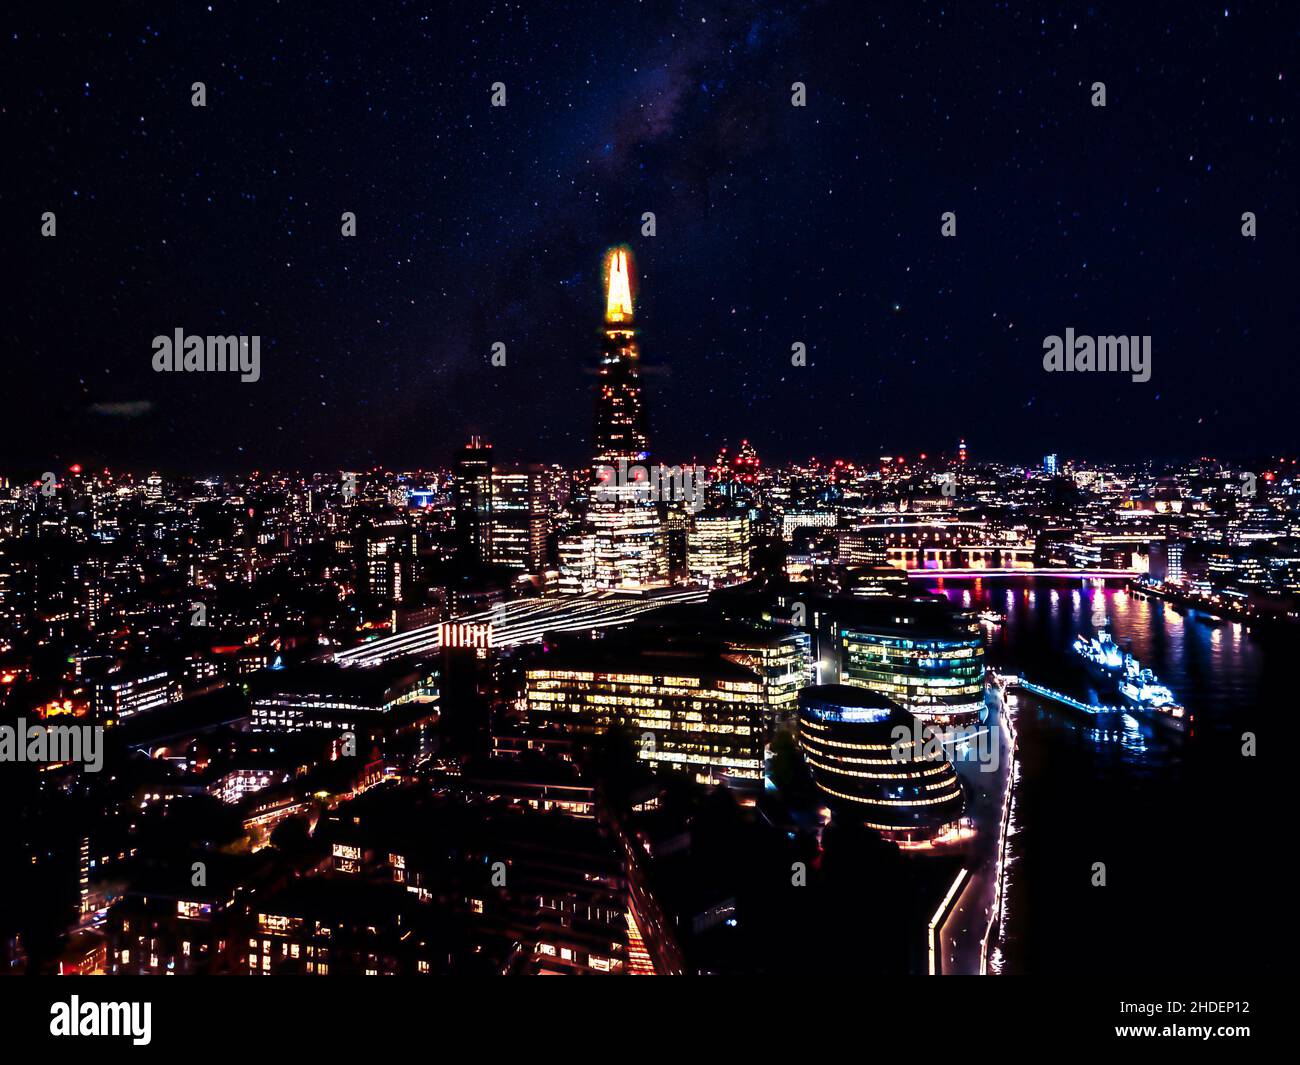 Stunning panorama view over Thames river in night the Shard, the London skyline and cityscape. Aerial photo over the big city. Stock Photo